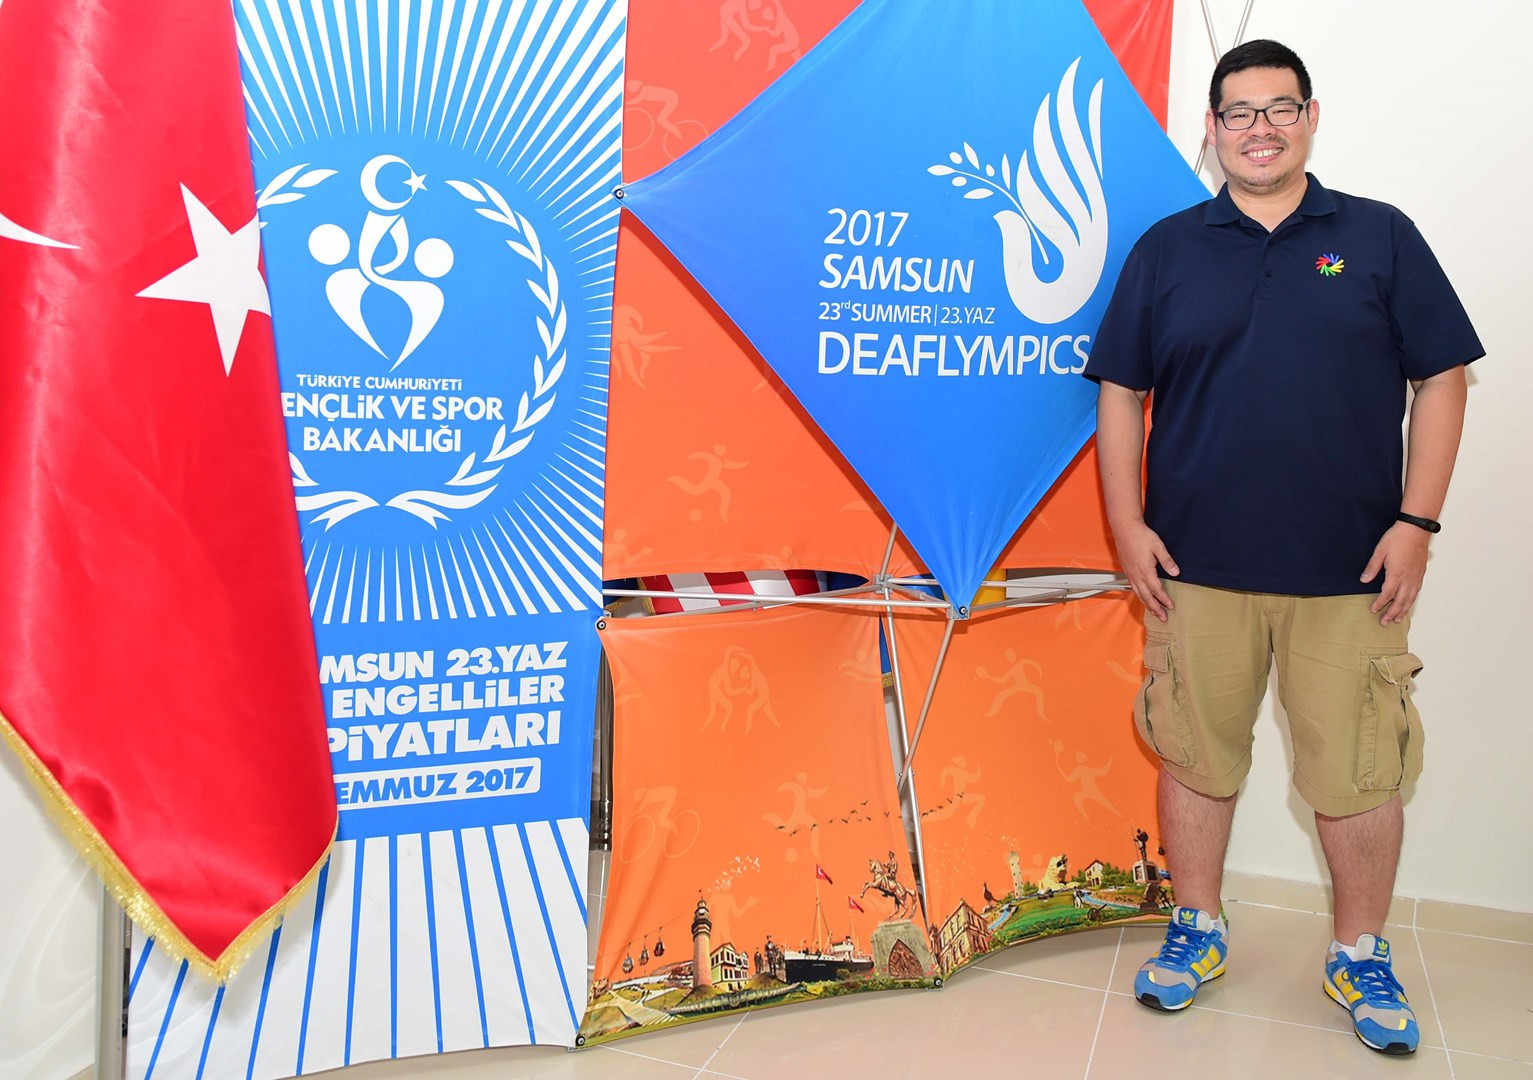 Kang Chen pictured attending the 2017 Summer Deaflympics in Samsun ©Deaflympics